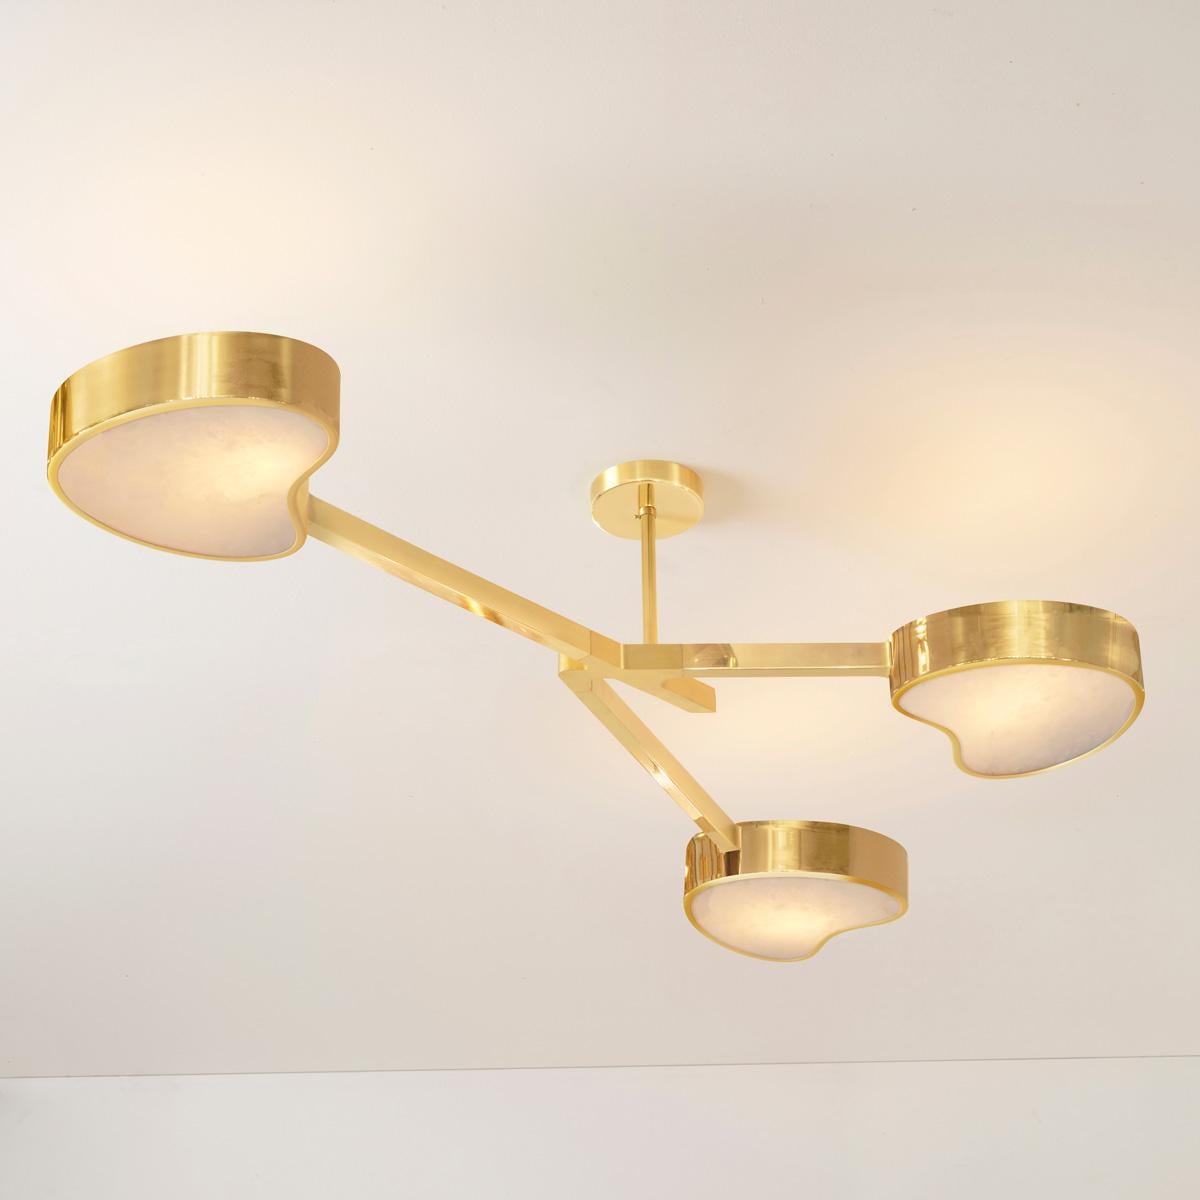 Cuore N.3 Ceiling Light by Gaspare Asaro. Peltro and Bronze Finish For Sale 4